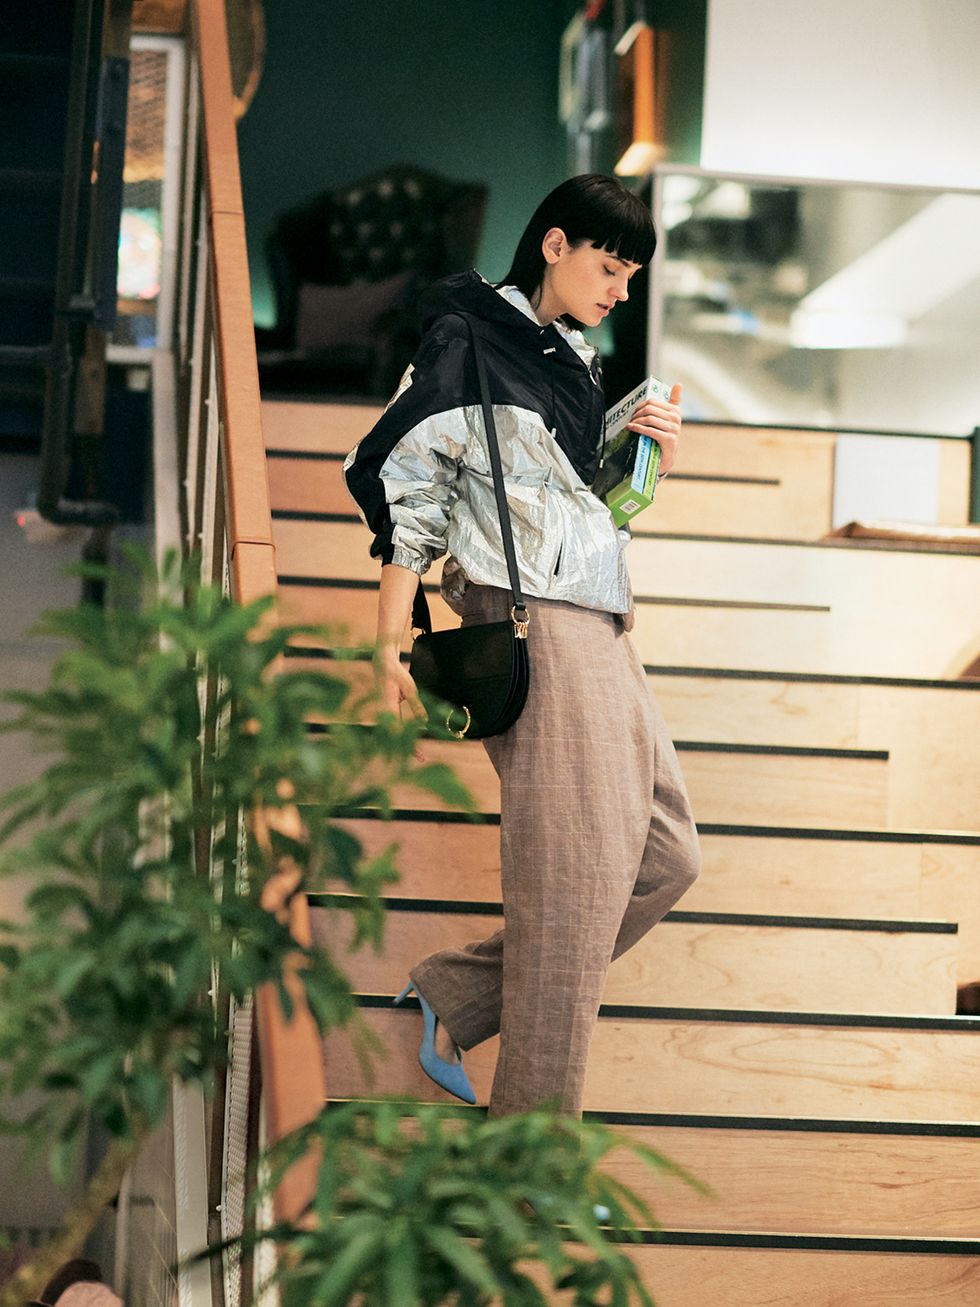 Trousers, Jacket, Bag, Street fashion, Stairs, Luggage and bags, Flowerpot, Top, Houseplant, Handbag, 